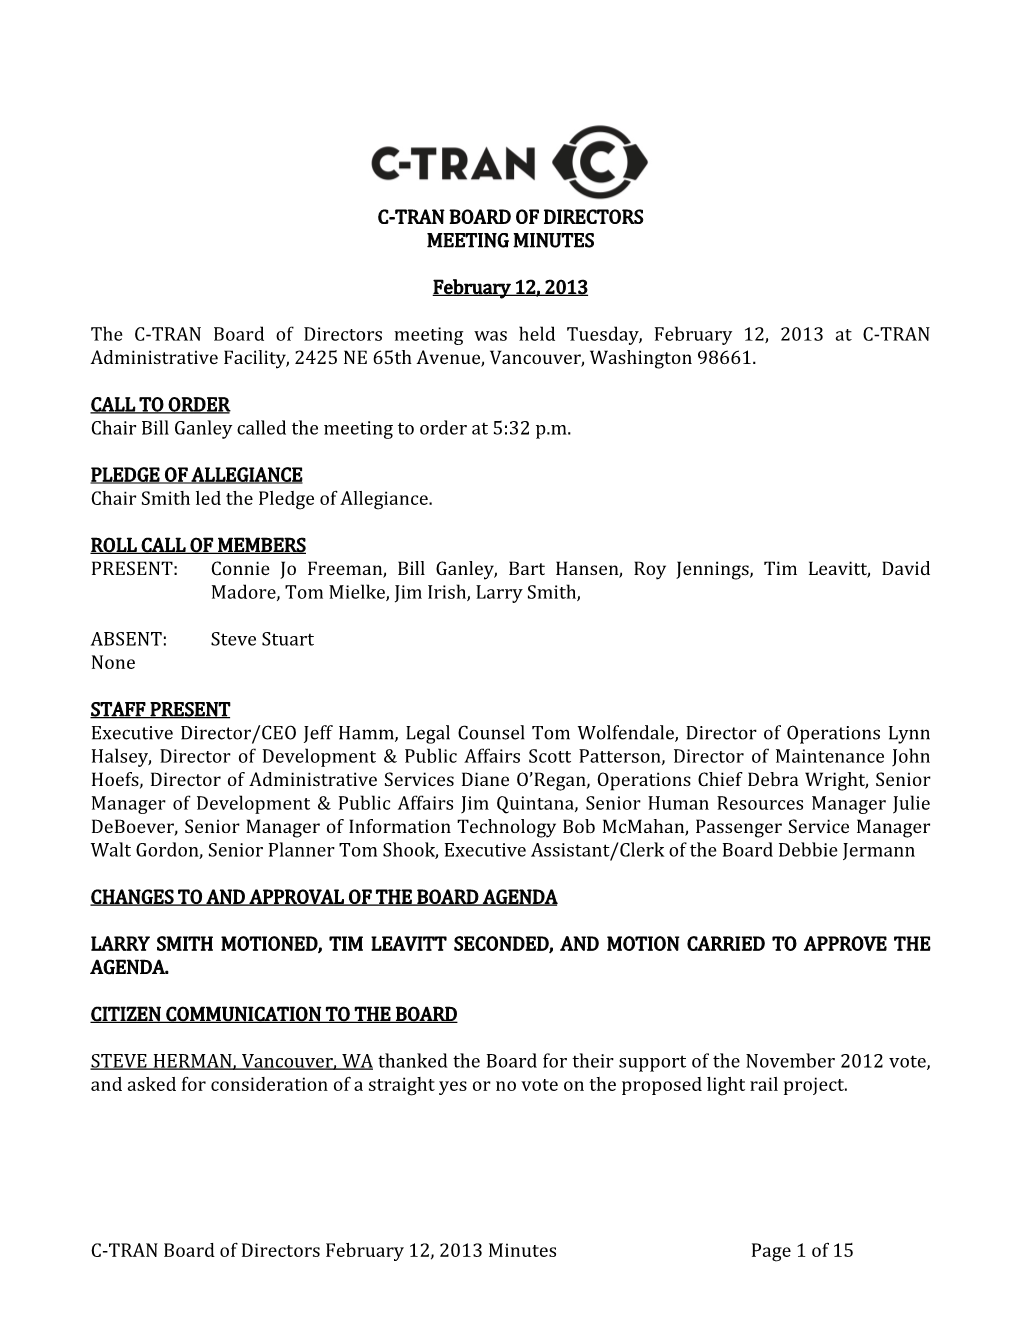 C-TRAN Board of Directors February 12, 2013 Minutes Page 1 of 15 C